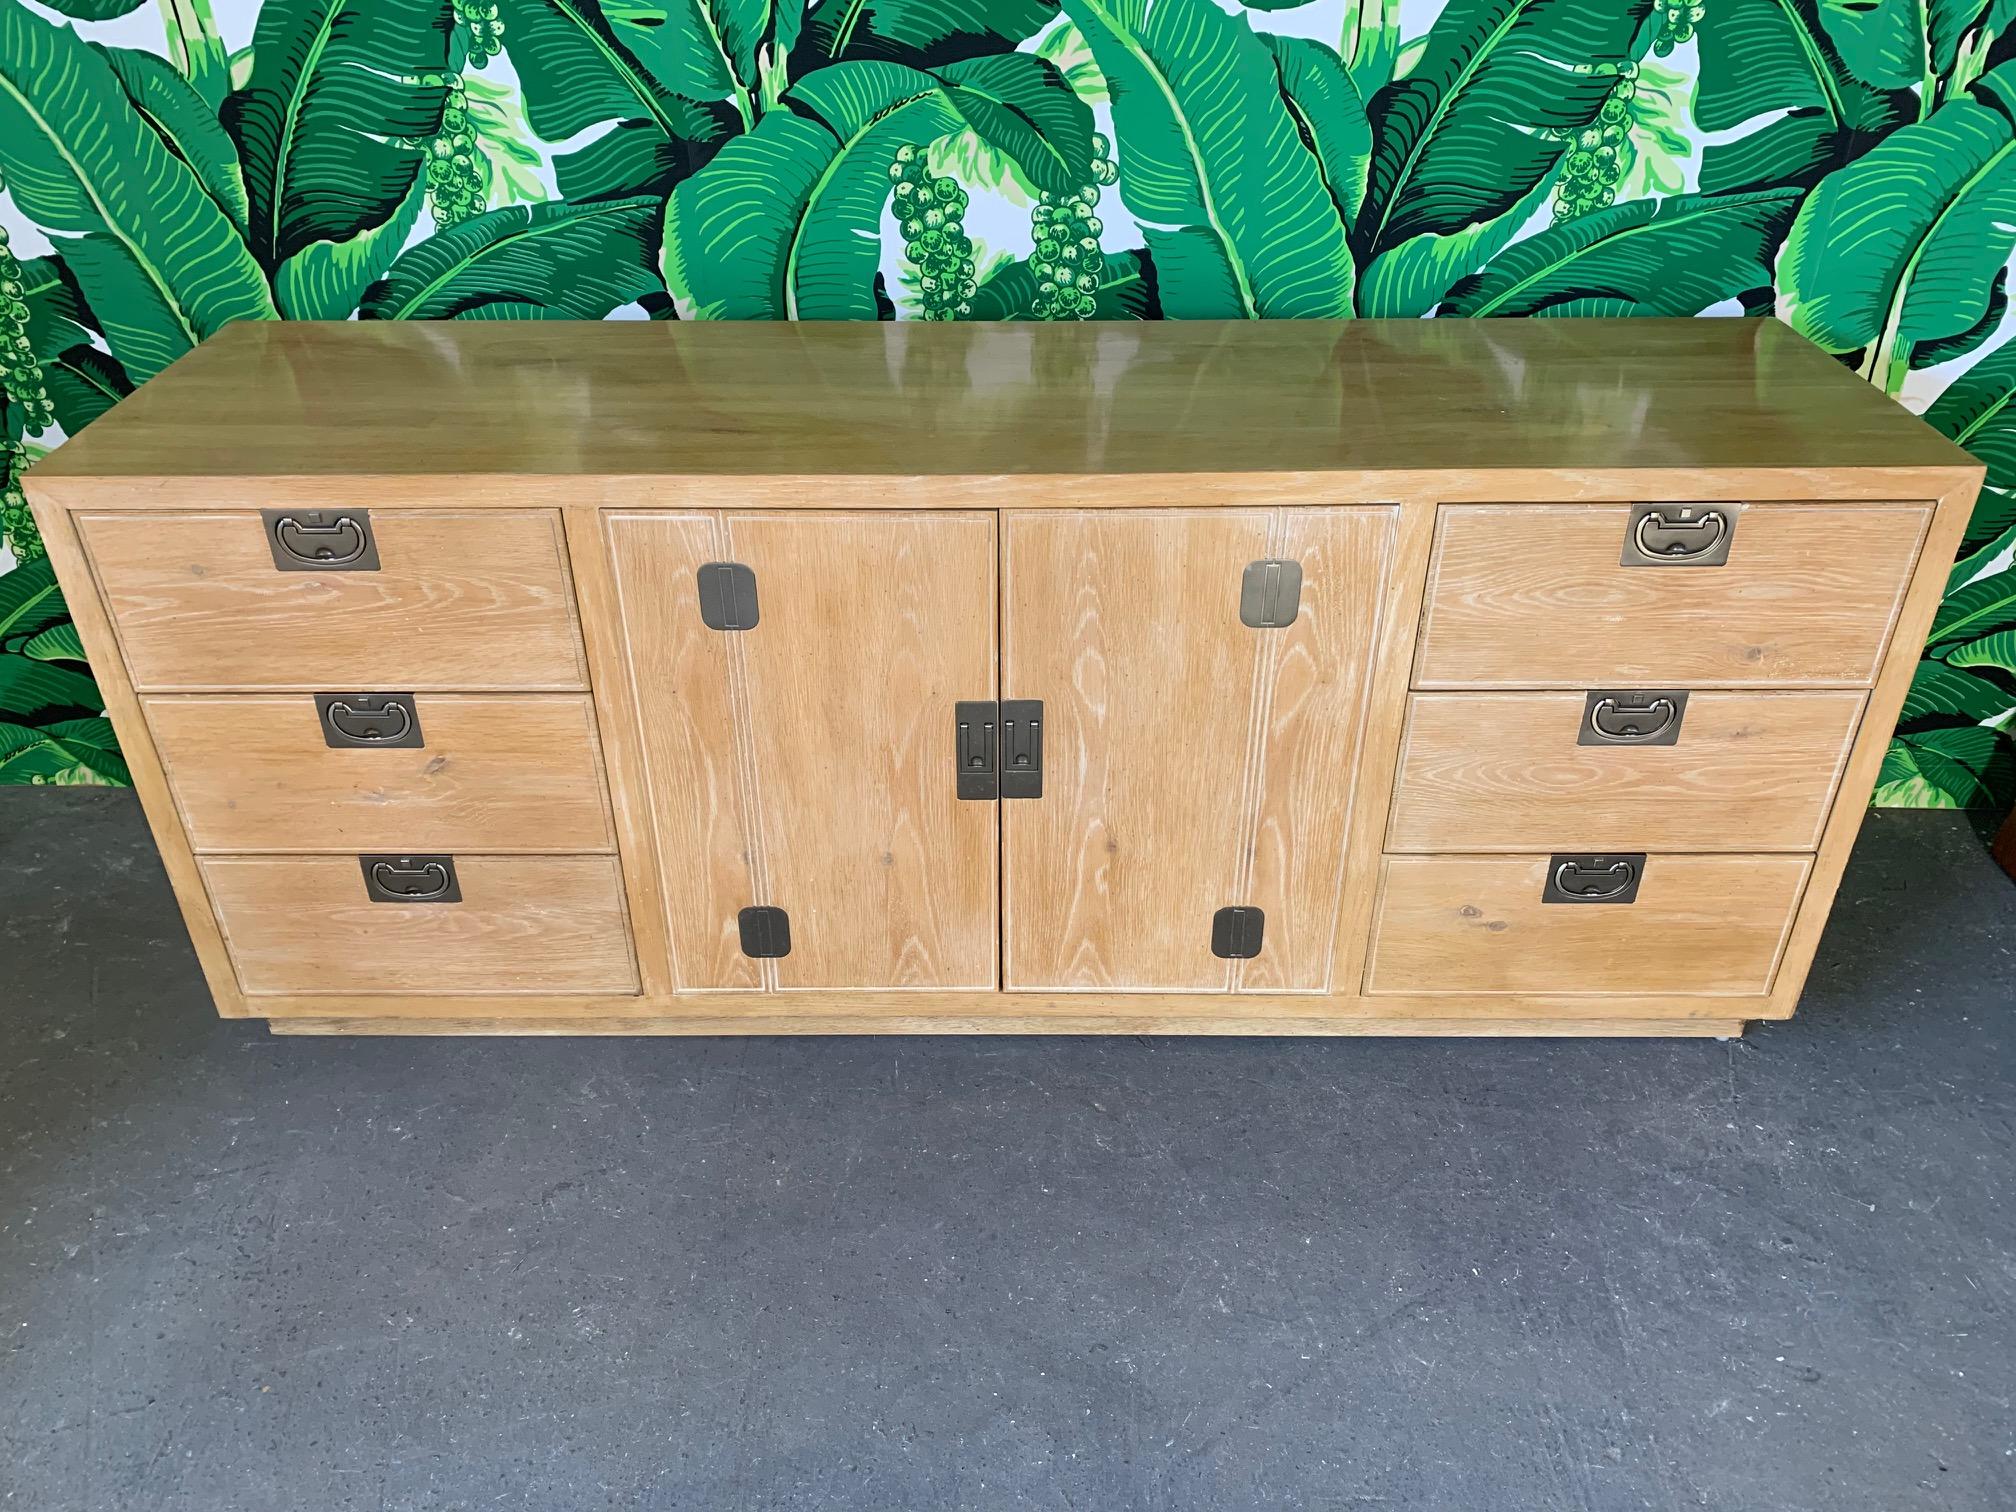 Vintage credenza by Henredon from their Bel Air collection. Perfect as sideboard or server, or even as dresser. Heavy hardware and plinth base. Very good condition with minor imperfections consistent with age.